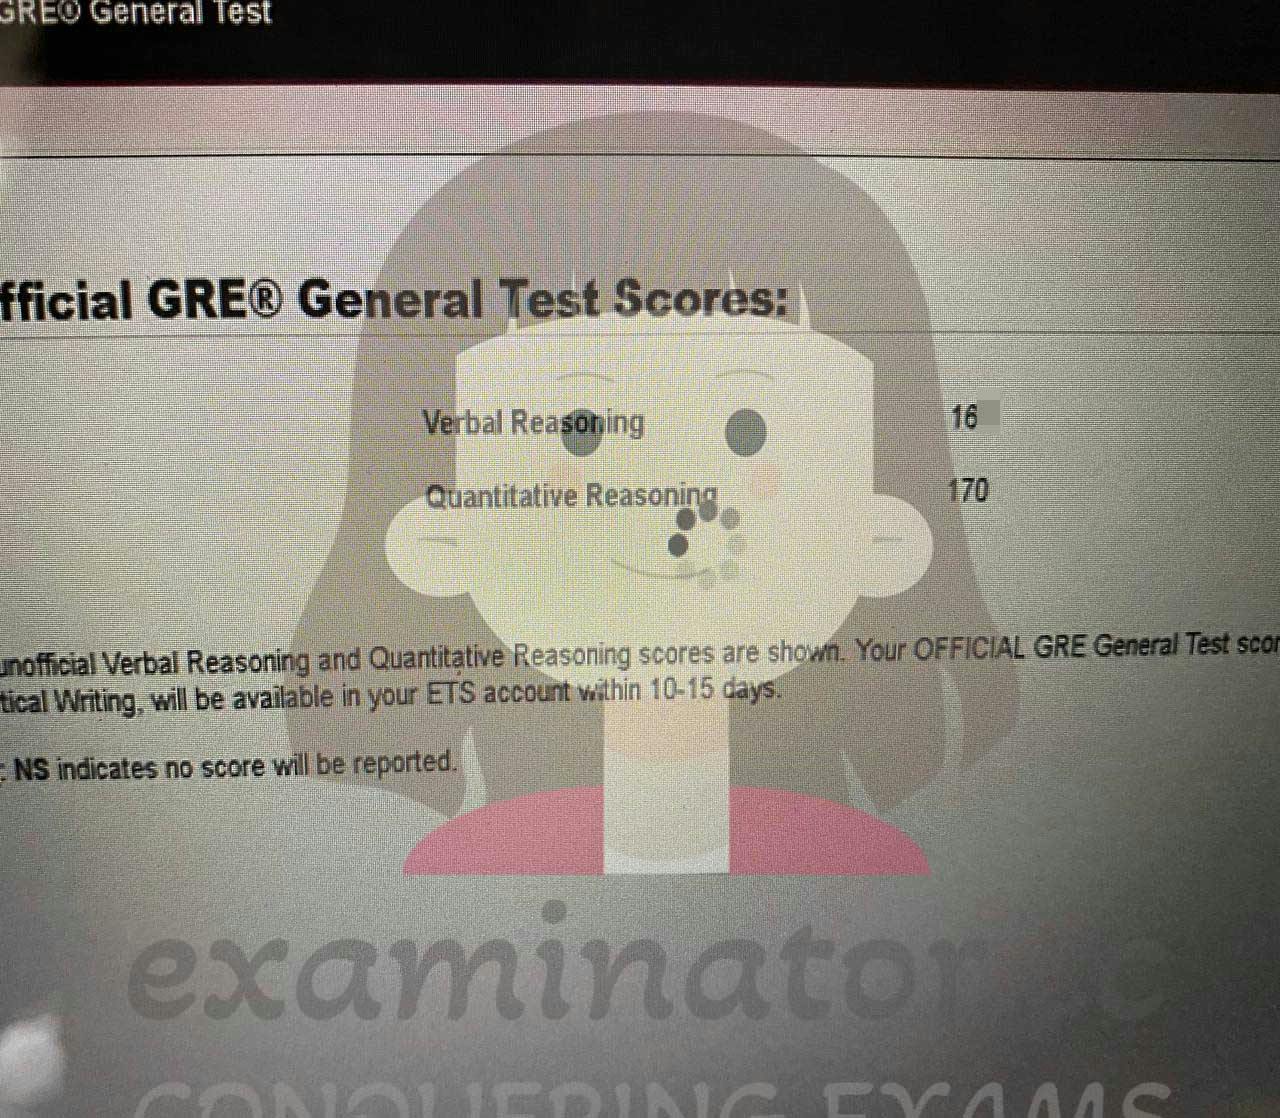 🇲🇽 “If You’re in Mexico, Tequila’s on Me!” - A Toast to GRE Success! 🍋🥂Mexican Client Achieves GRE Score Over 330 with Our Proxy Exam Help! Turning Essay Woes into Wins 📝